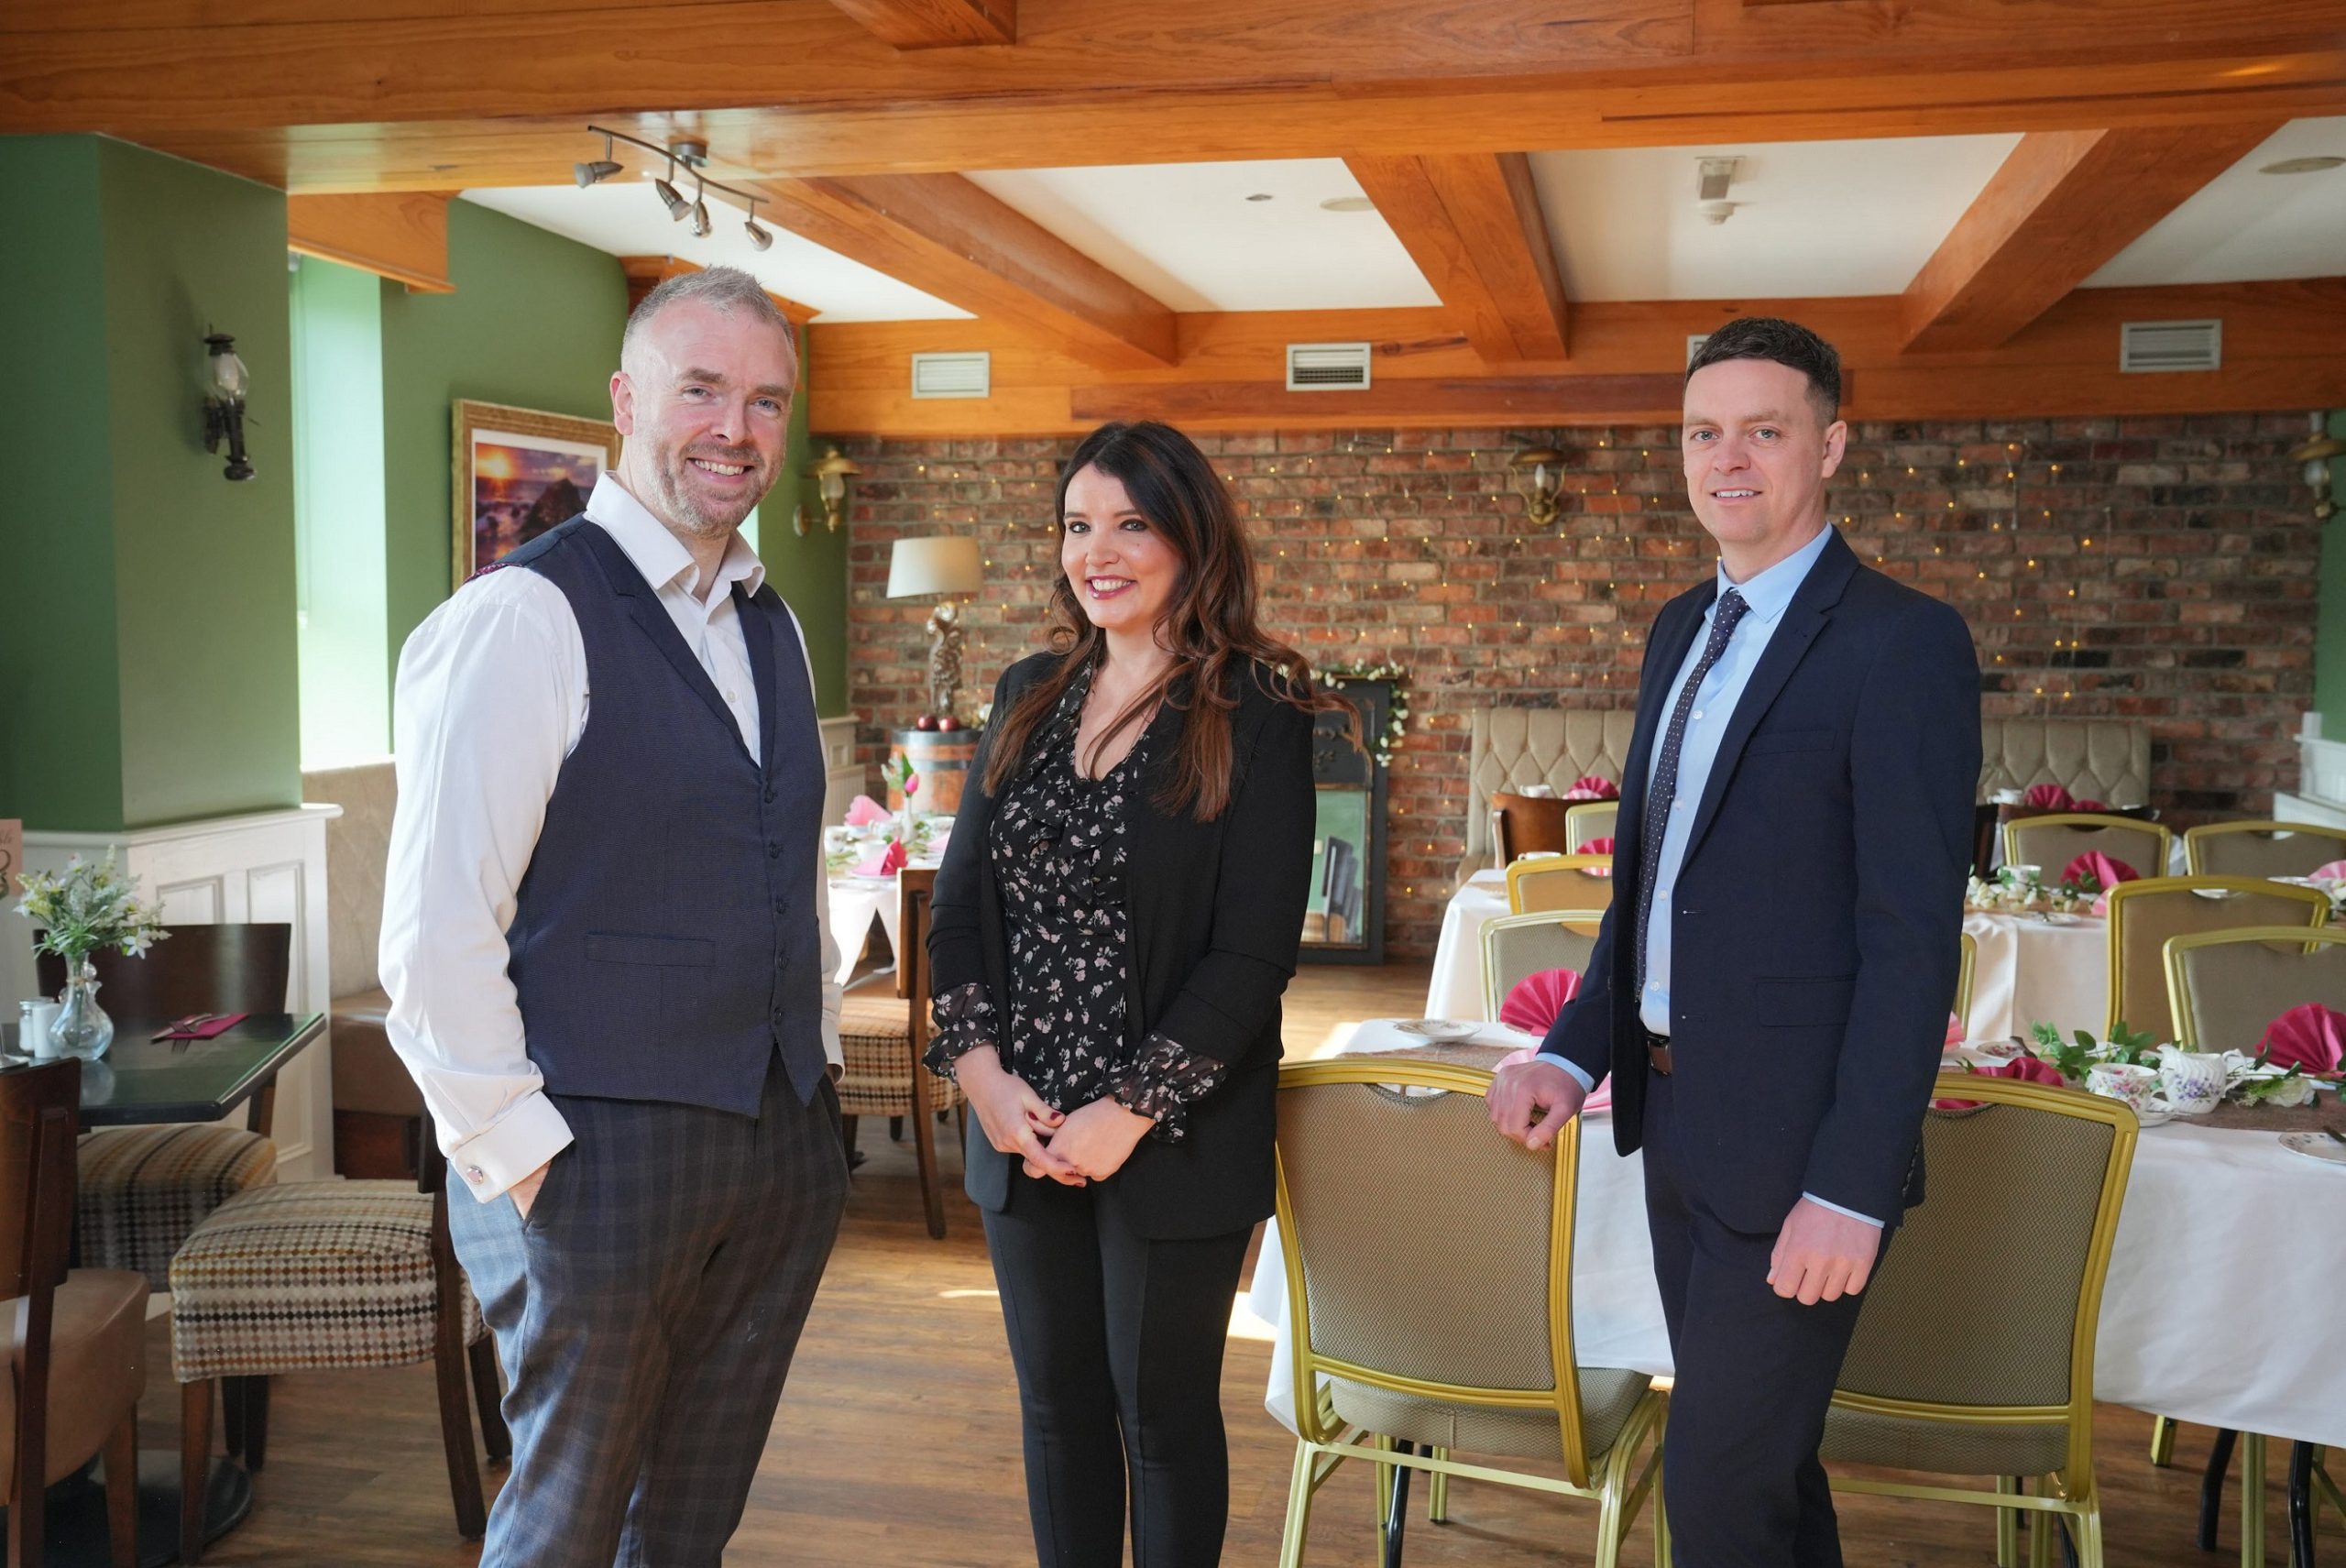 Co Down pub and restaurant acquired in six-figure deal